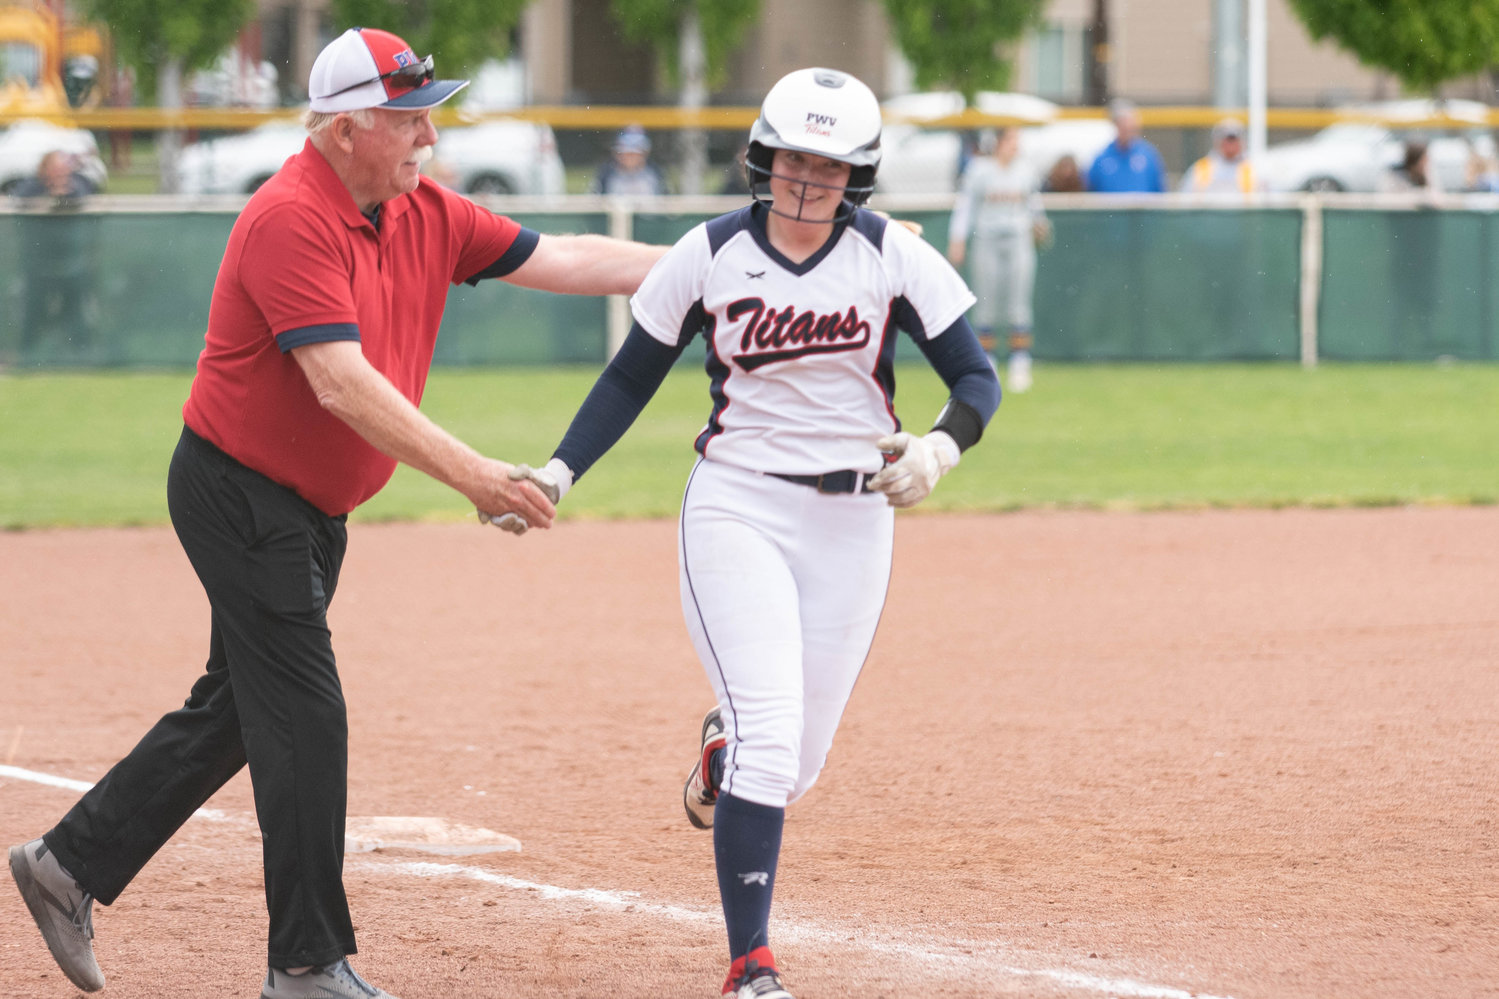 PWV coach Ken Olson sends Olivia Matlock toward home plate after her home run against Adna in the state title game at Yakima Gateway Sports Complex May 28.